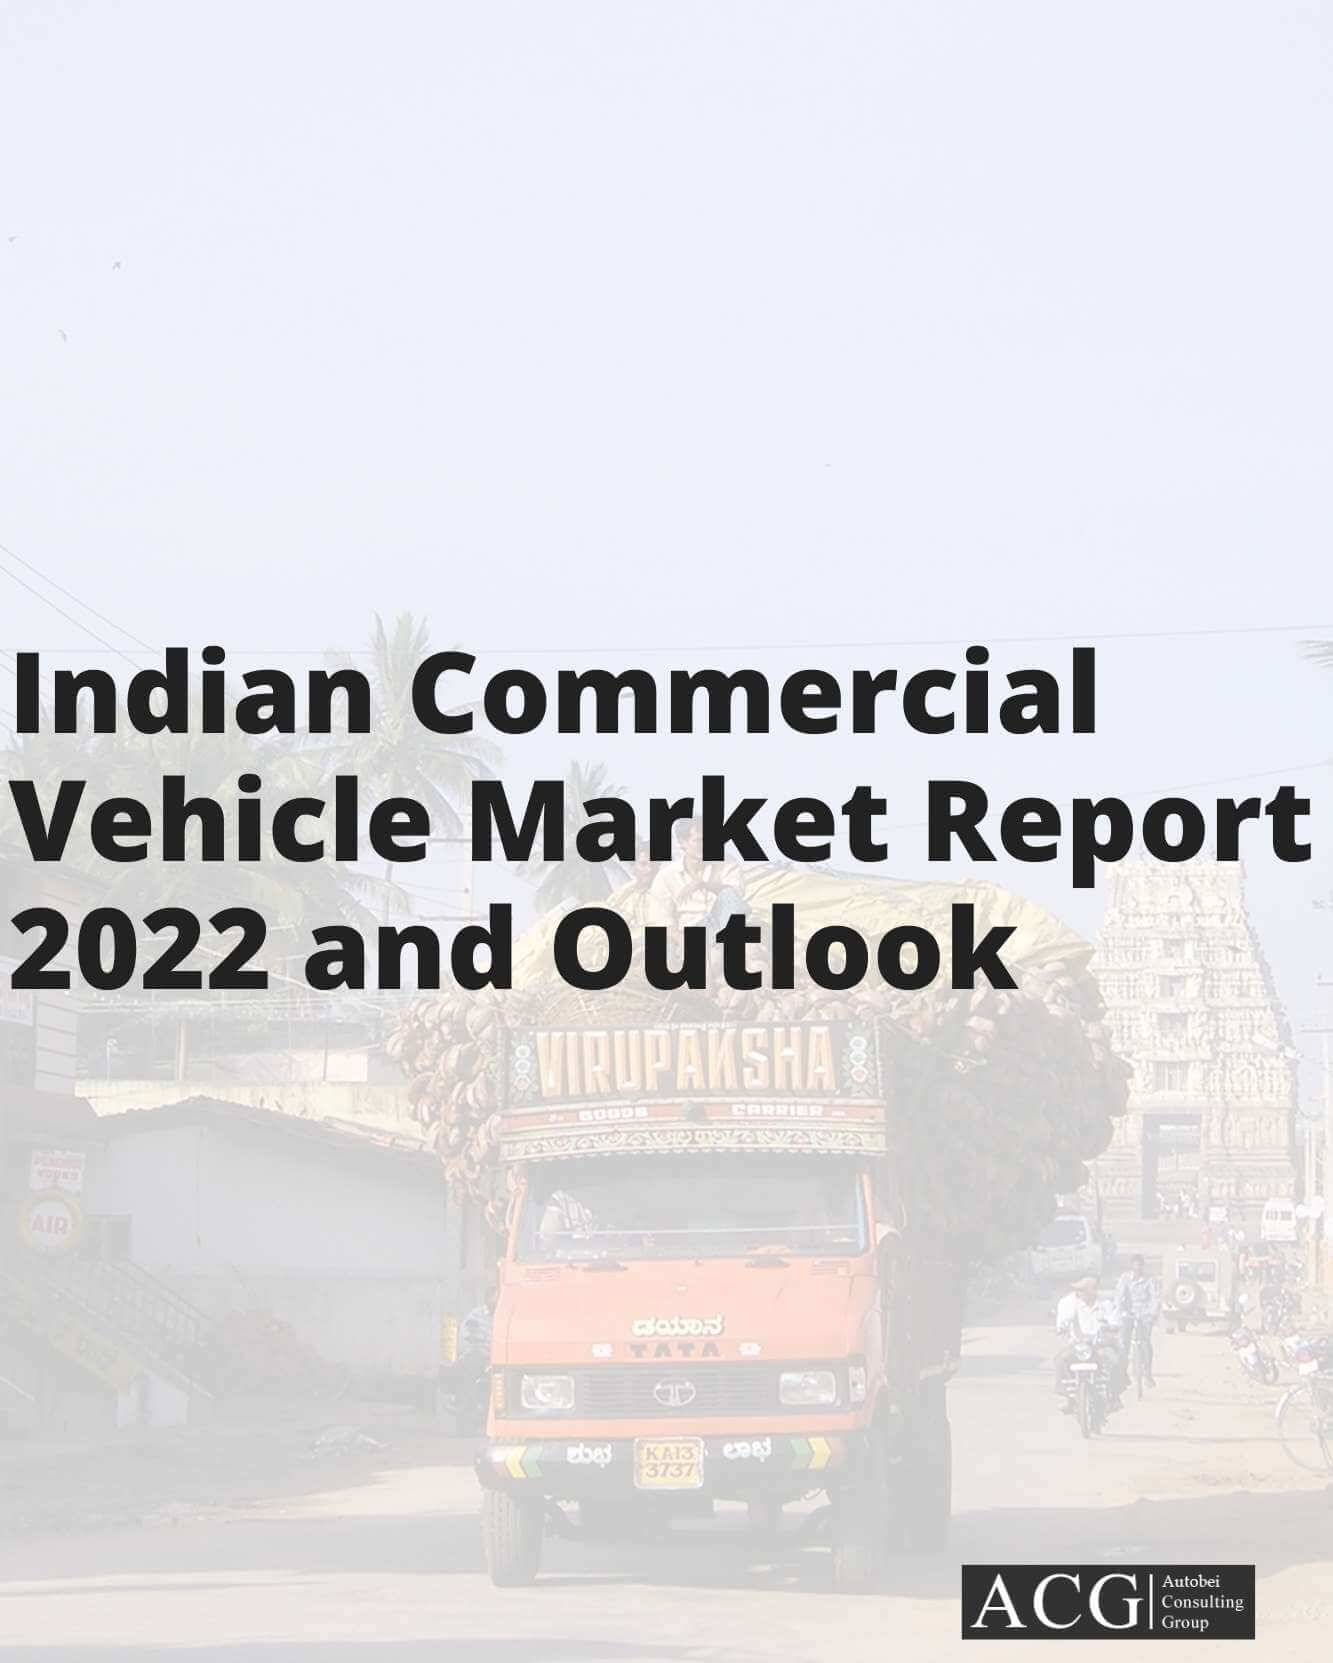 Indian Commercial Vehicle Market Report 2022 and Forecast